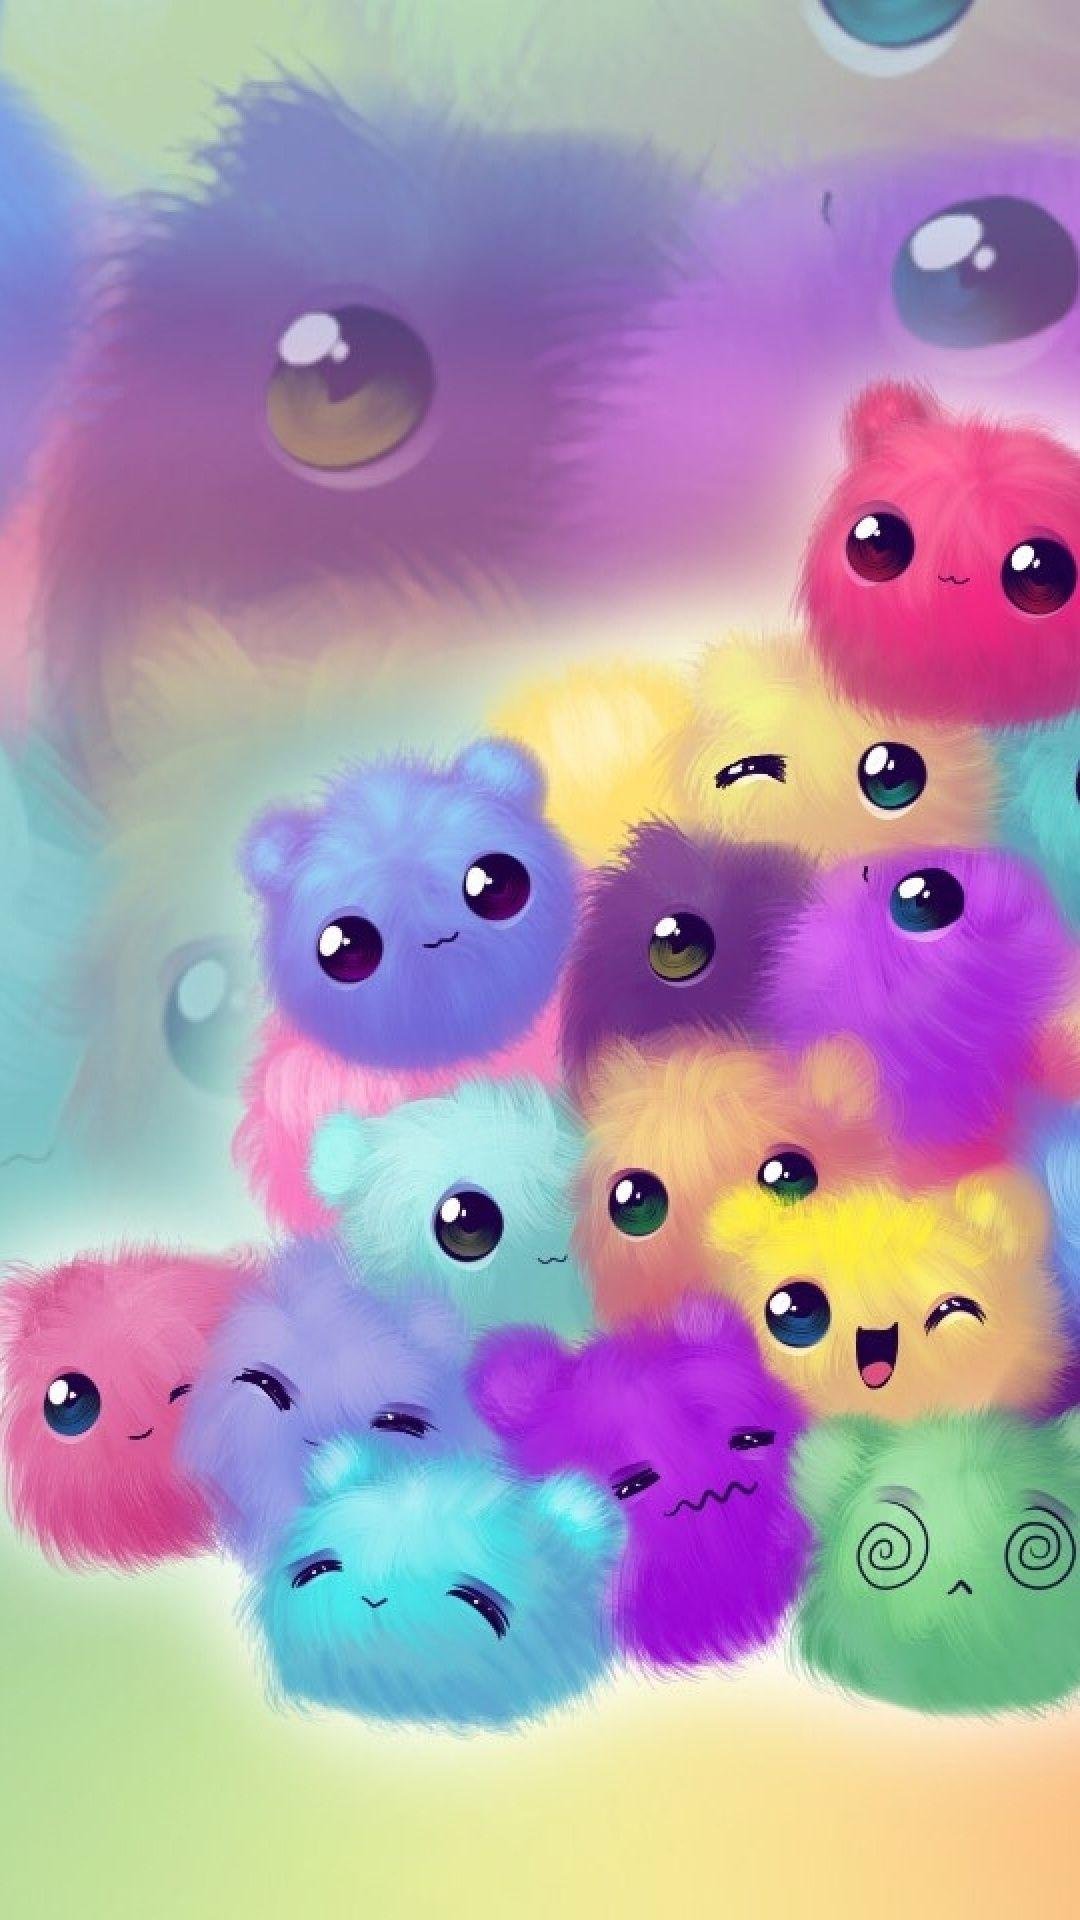 Kawaii brick galaxy iPhoneAndroid wallpaper I created for the app CocoPPa   Cute wallpapers Galaxy wallpaper quotes Cute galaxy wallpaper